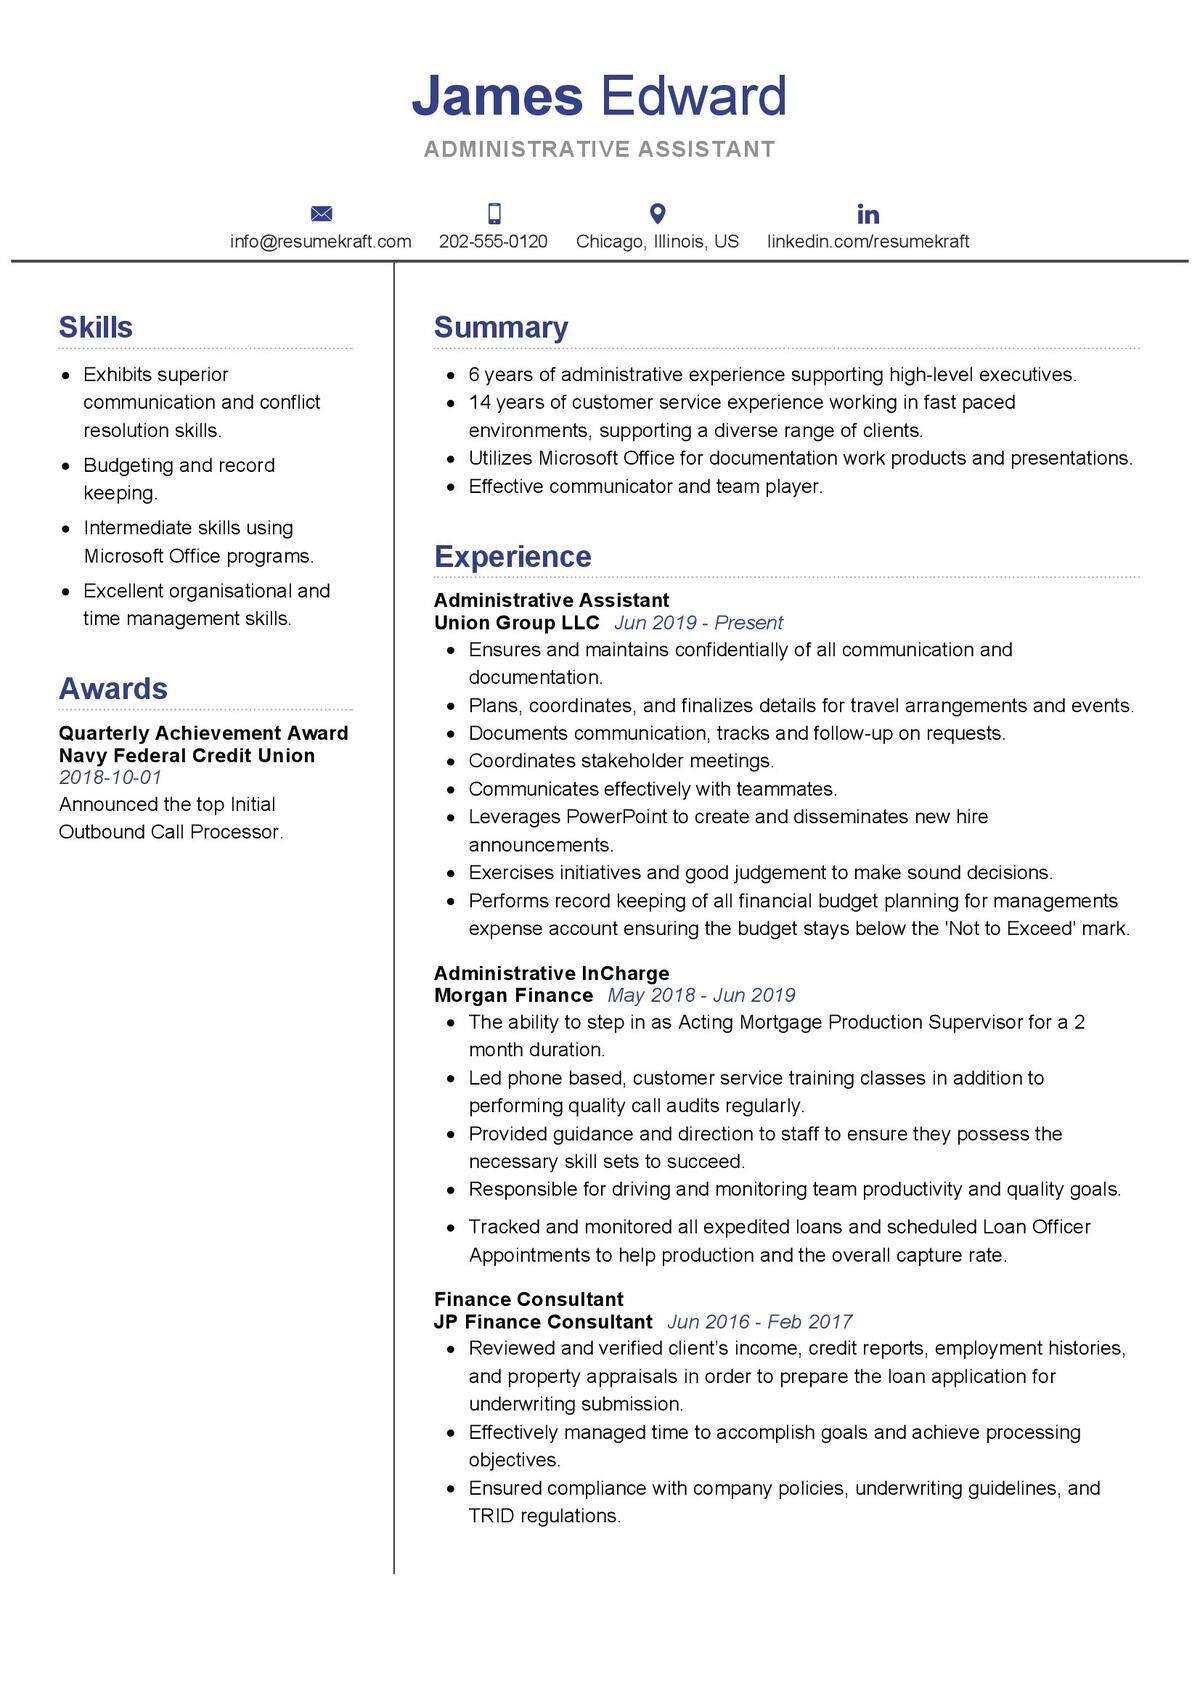 Sample Resume Objectives for Administrative assistant Position Administrative assistant Resume Sample 2021 Writing Guide …